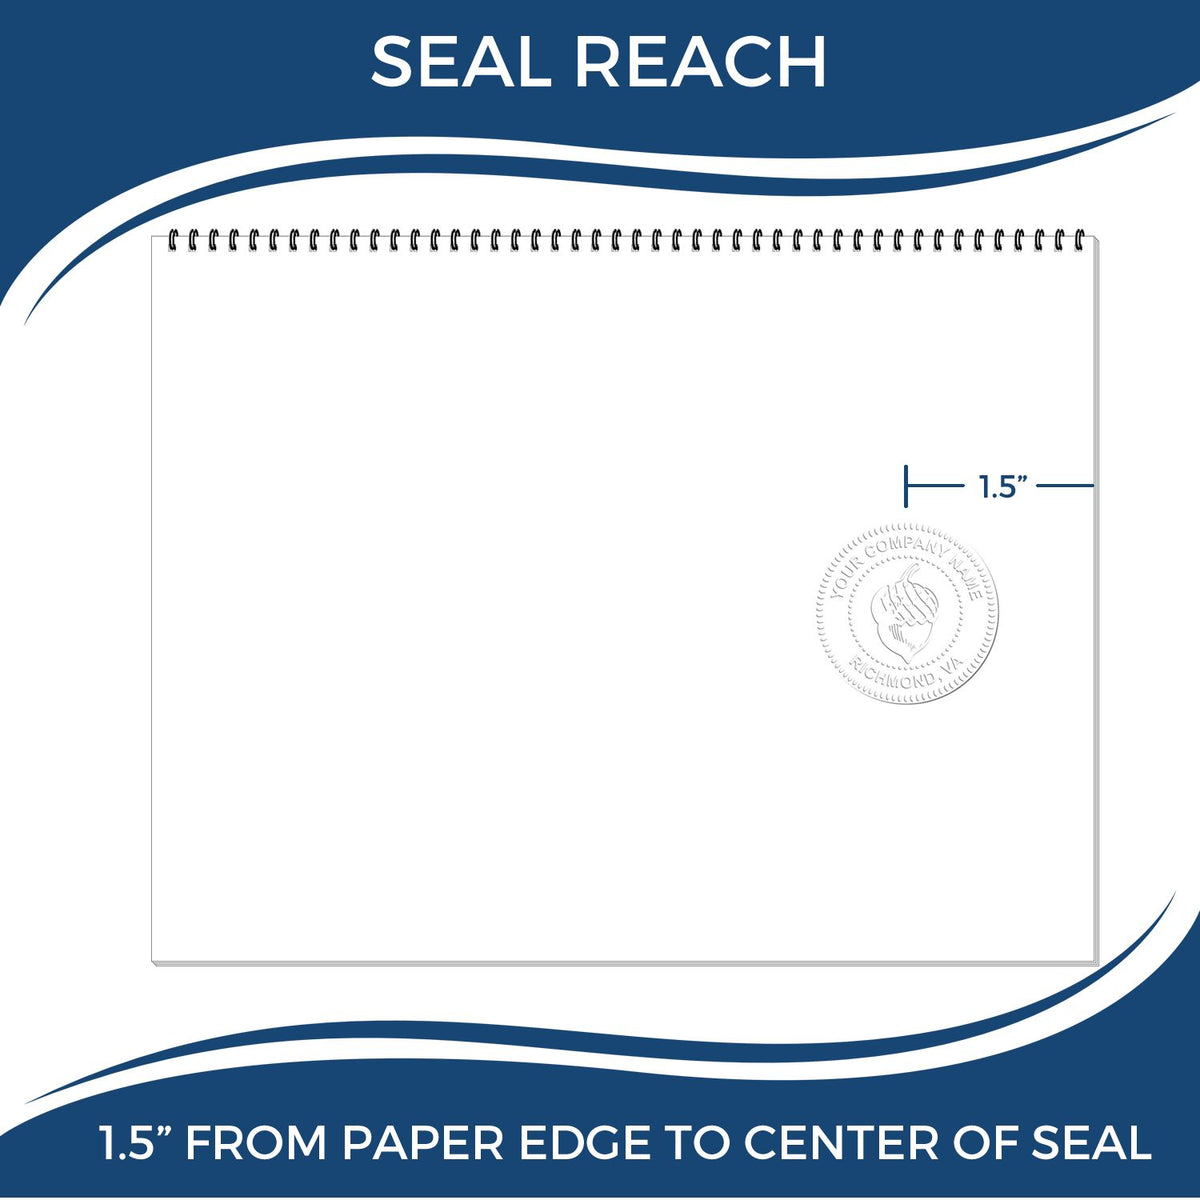 An infographic showing the seal reach which is represented by a ruler and a miniature seal image of the Handheld North Dakota Professional Engineer Embosser